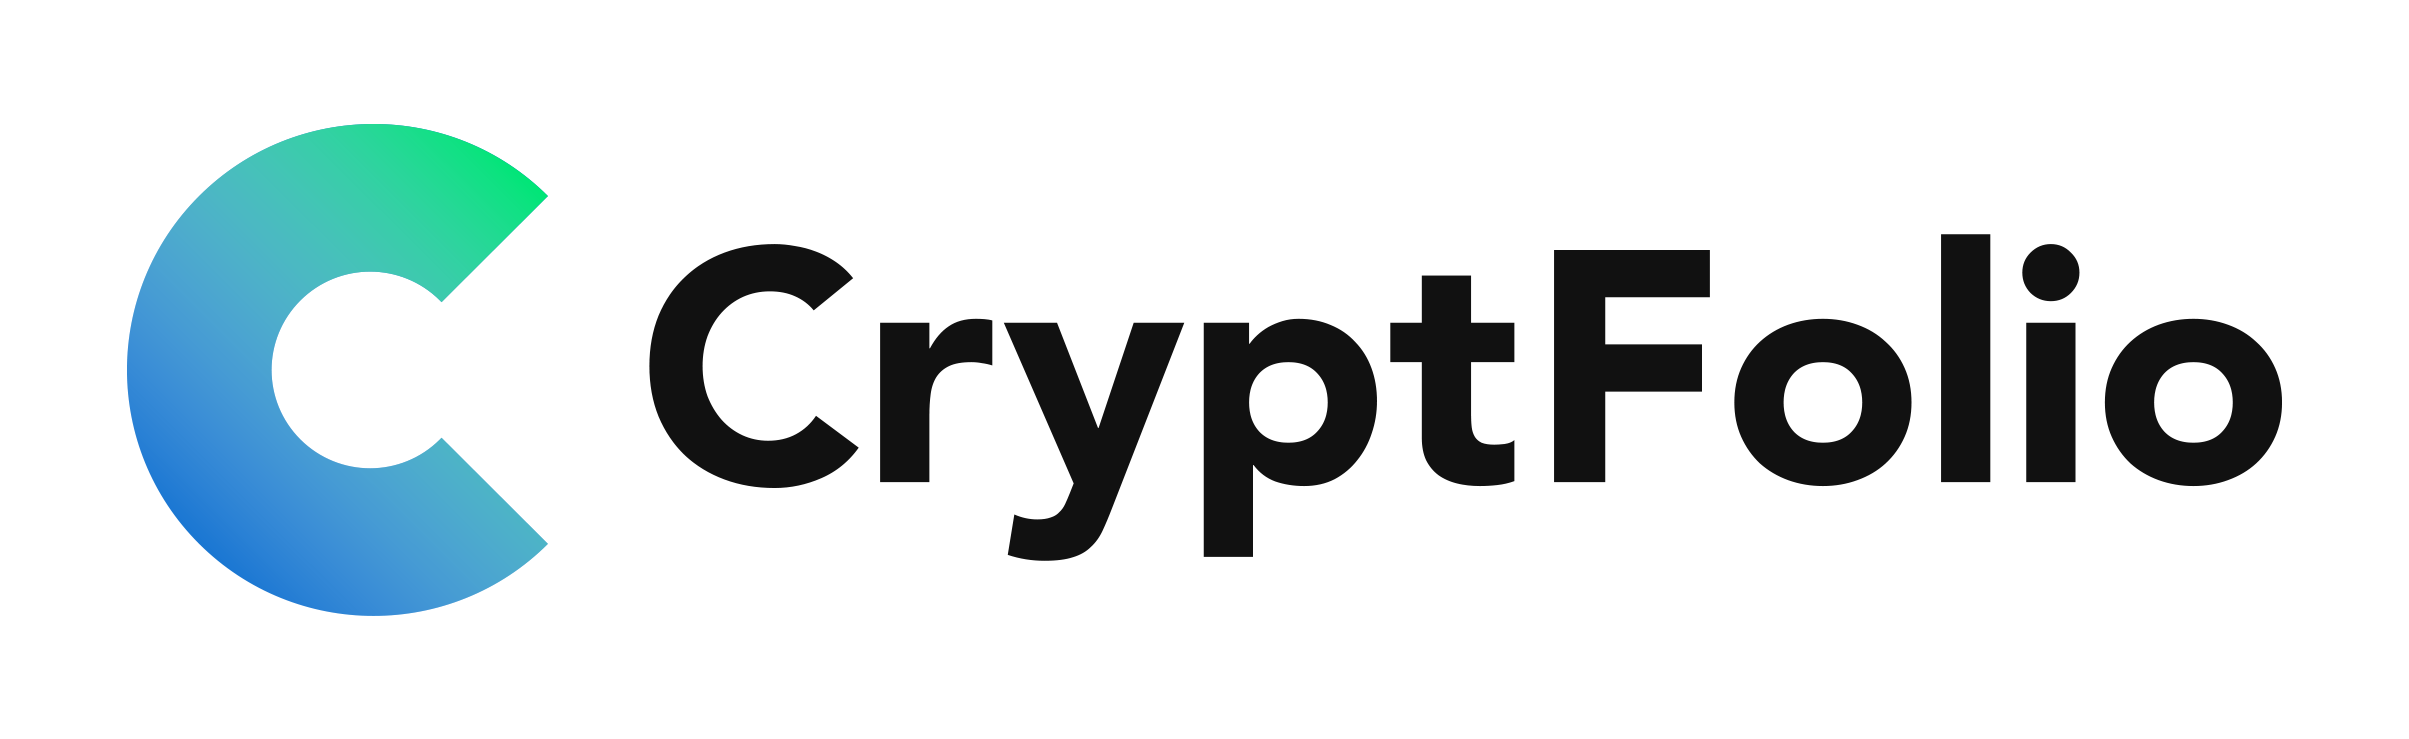 CryptFolio logo in PNG